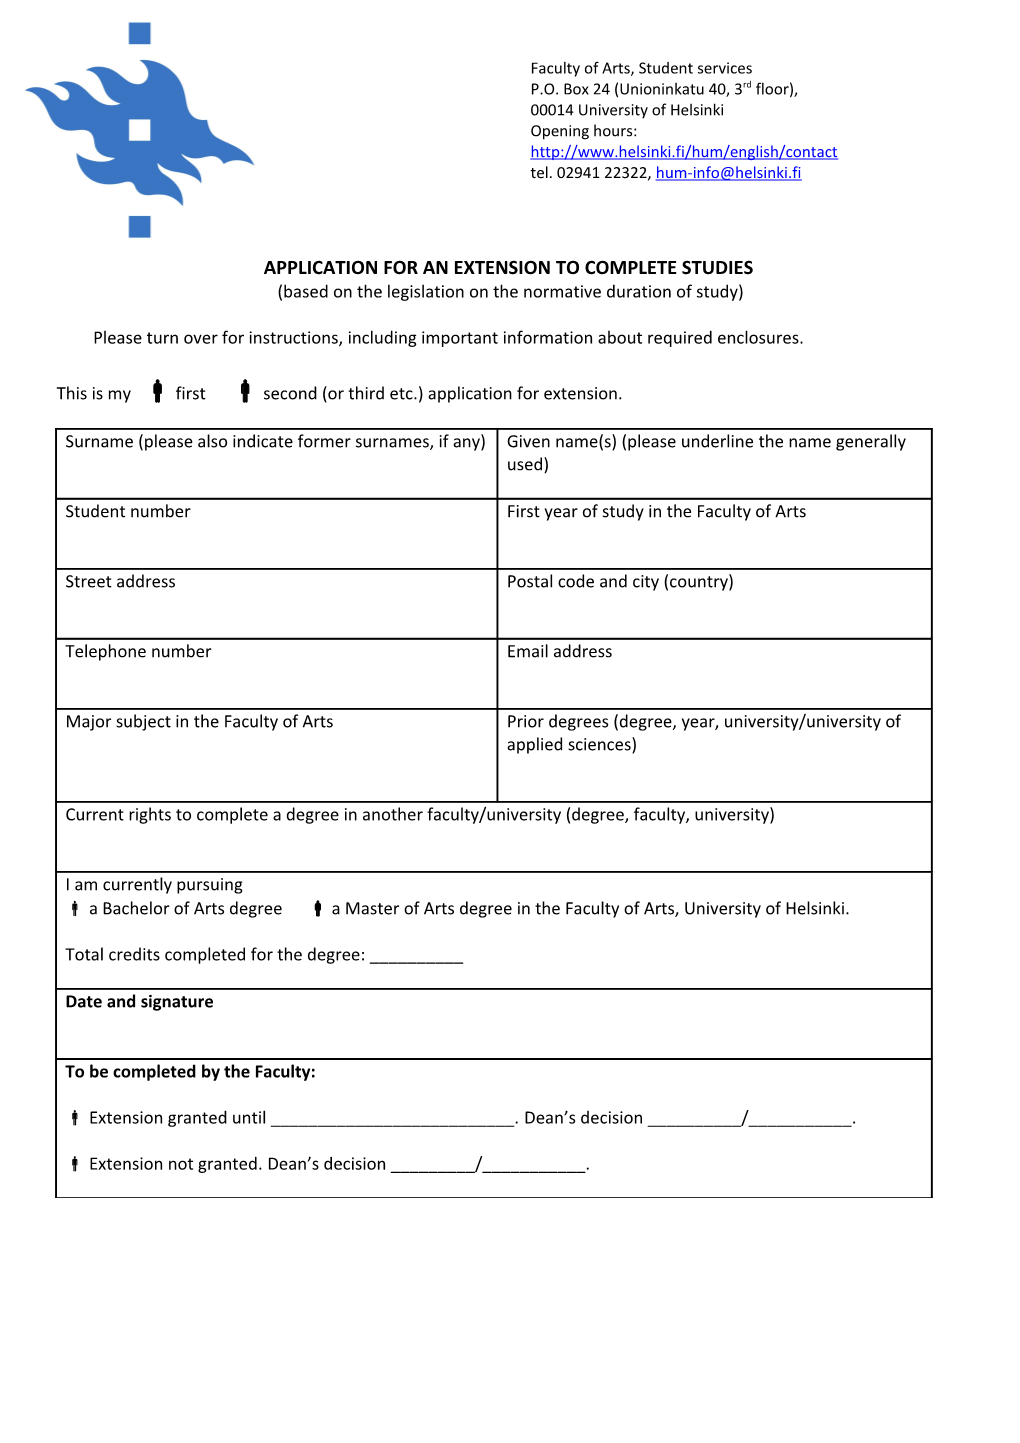 Application for an Extension to Complete Studies